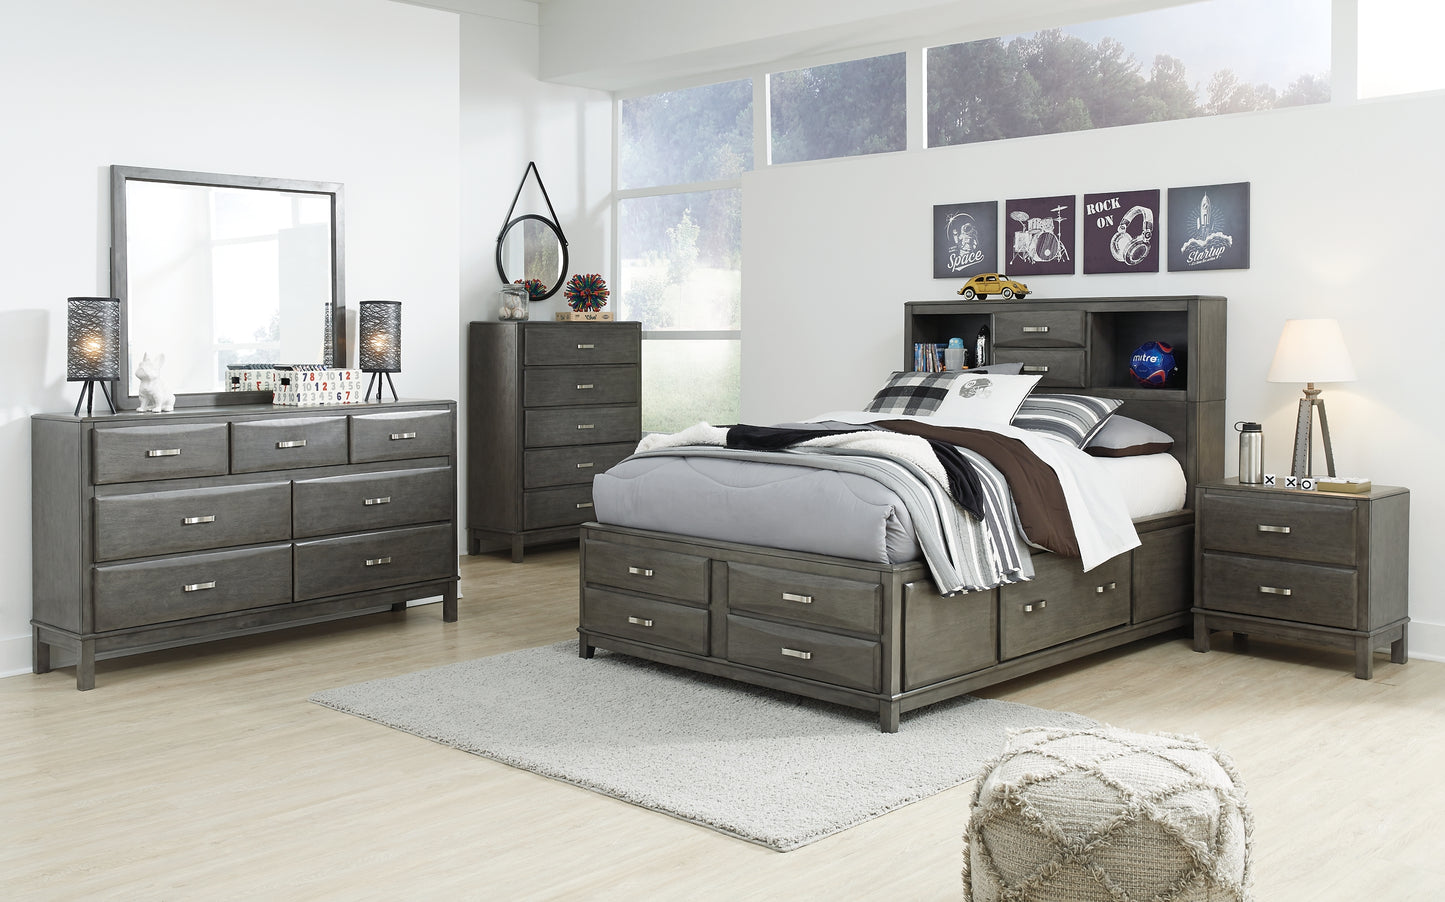 Caitbrook  Storage Bed With 8 Storage Drawers With Dresser